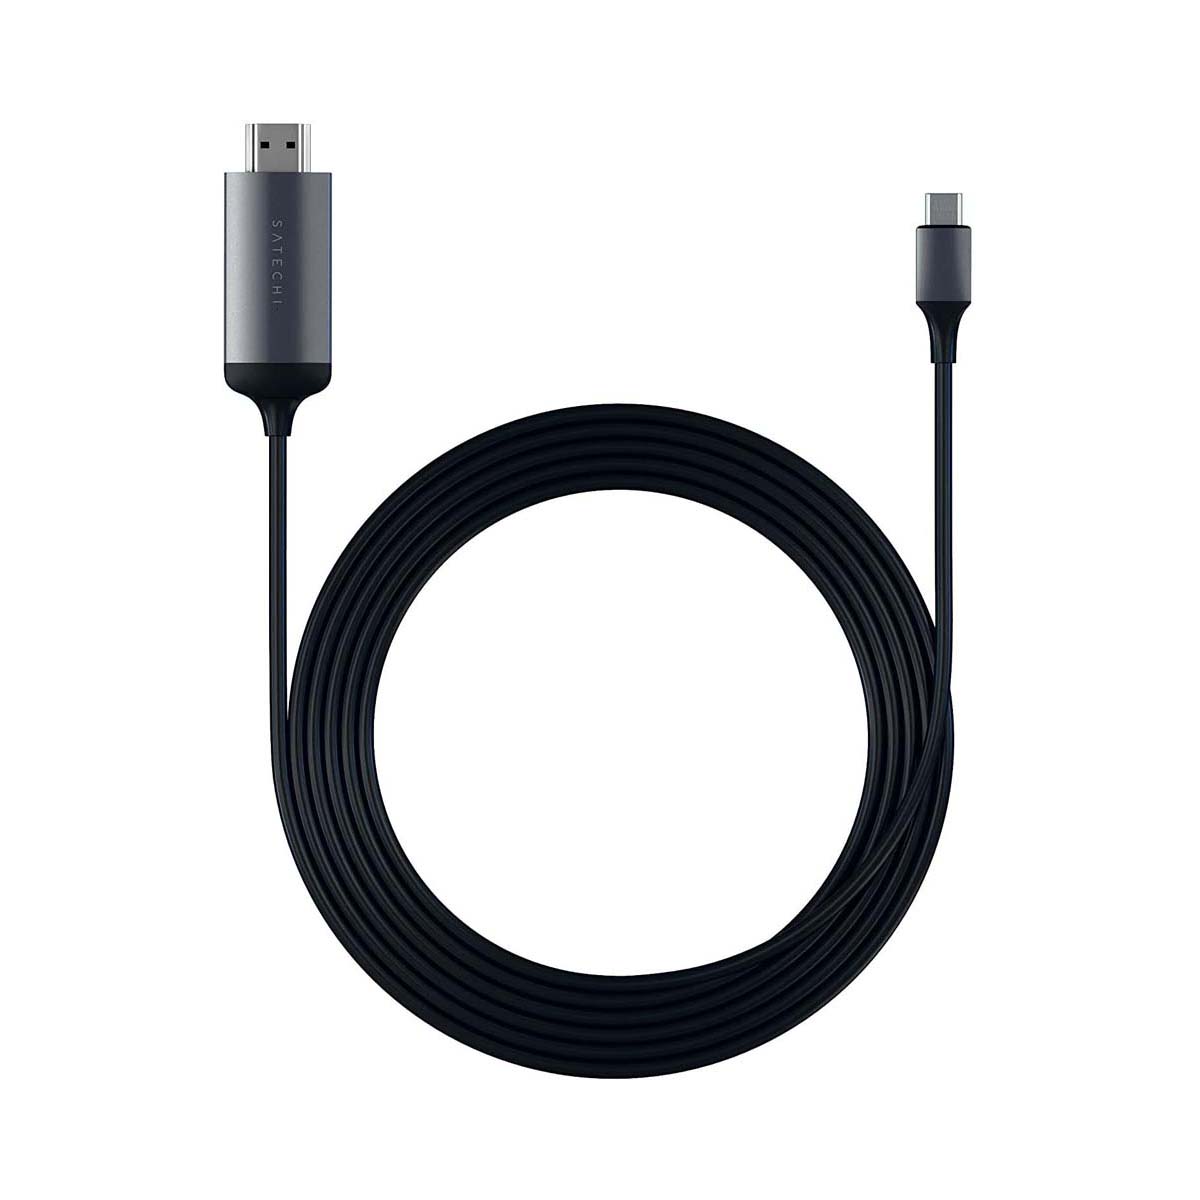 Satechi - Cable, Type-C to HDMI, Space Grey